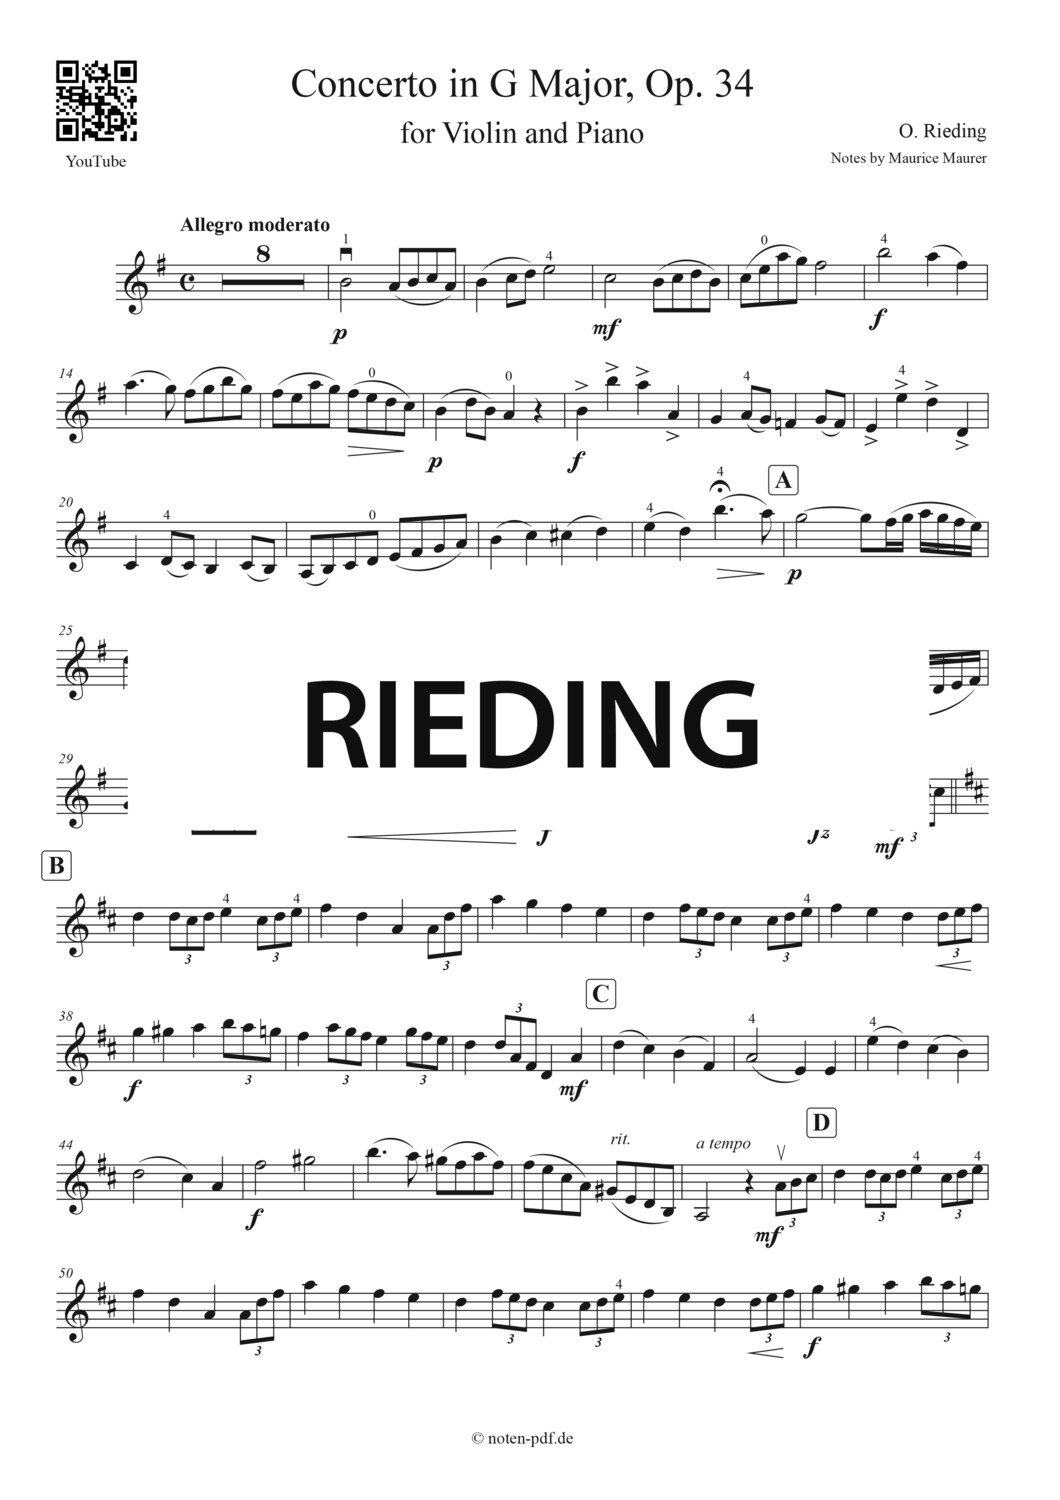 Rieding: Concerto in G Major Op. 34, 1. Movement